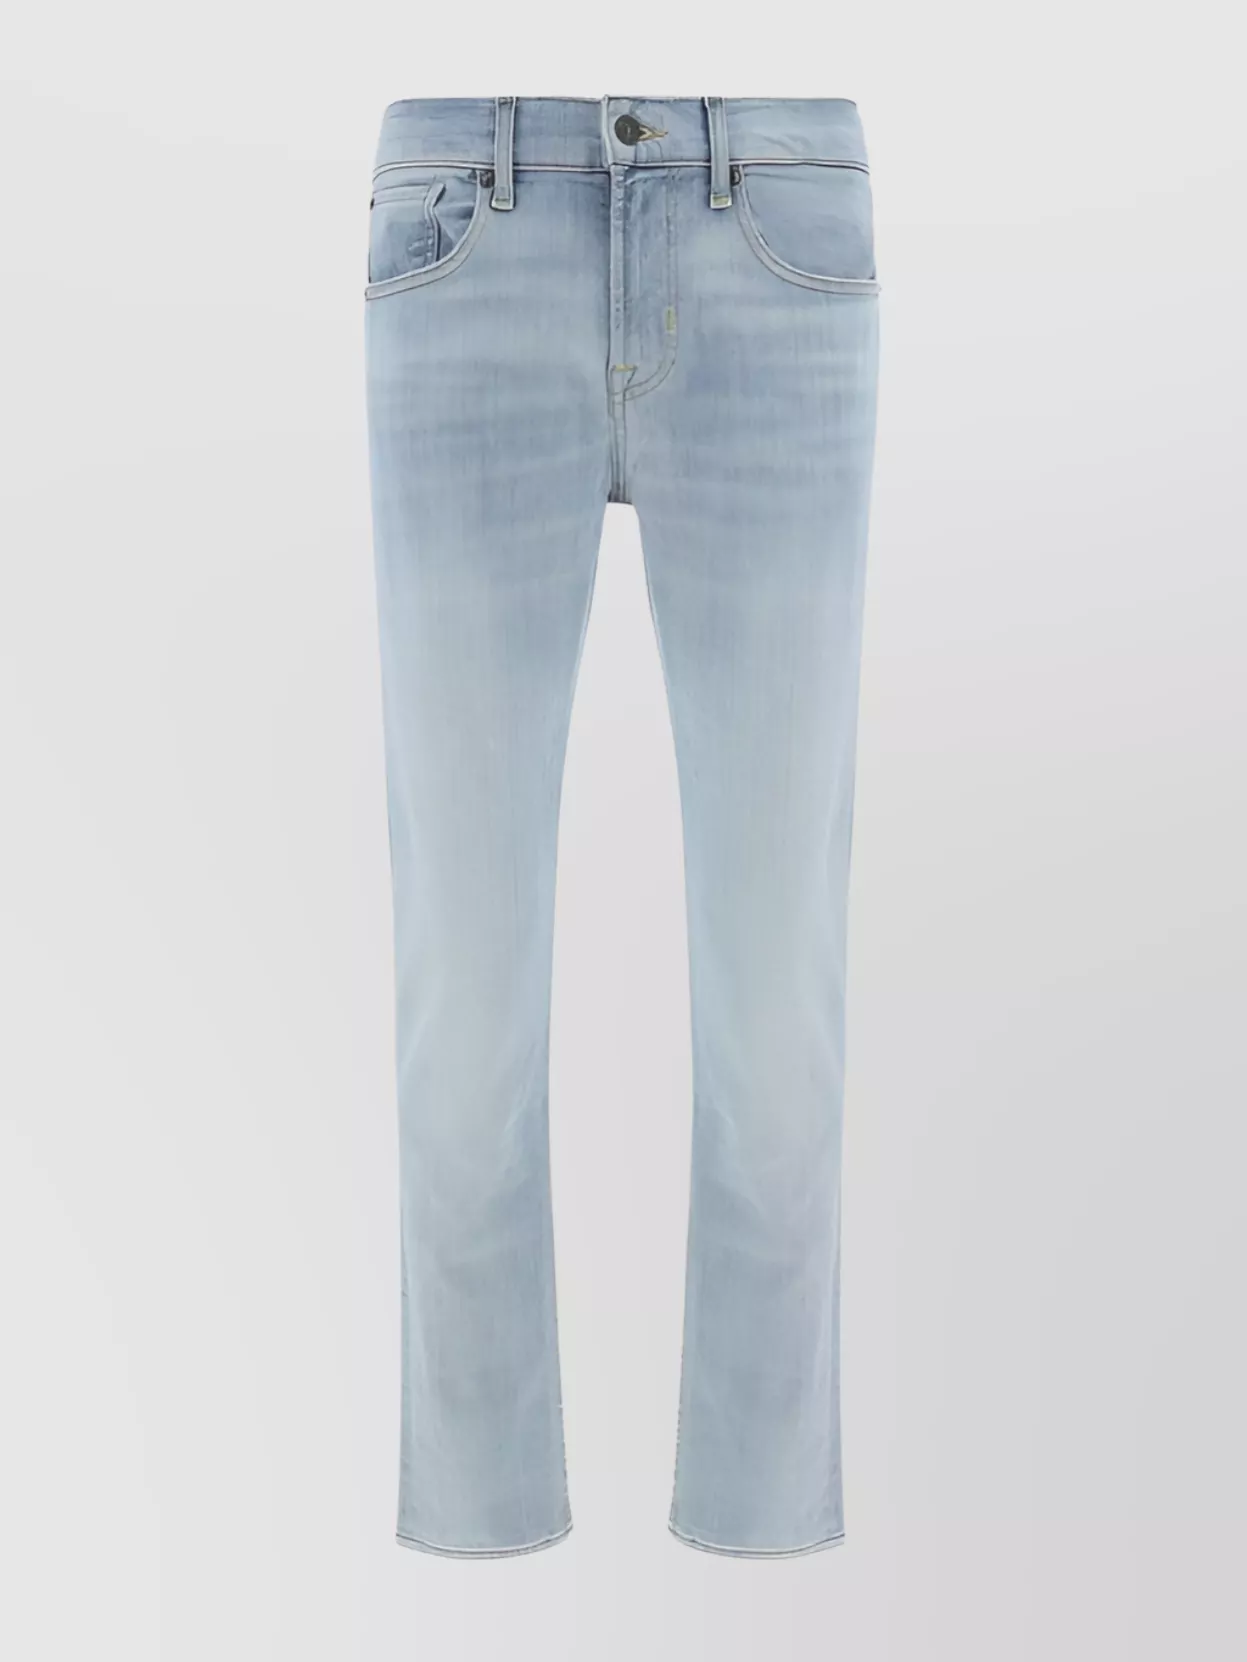 Shop 7 For All Mankind Straight Cut Cotton Jeans With Back Pockets